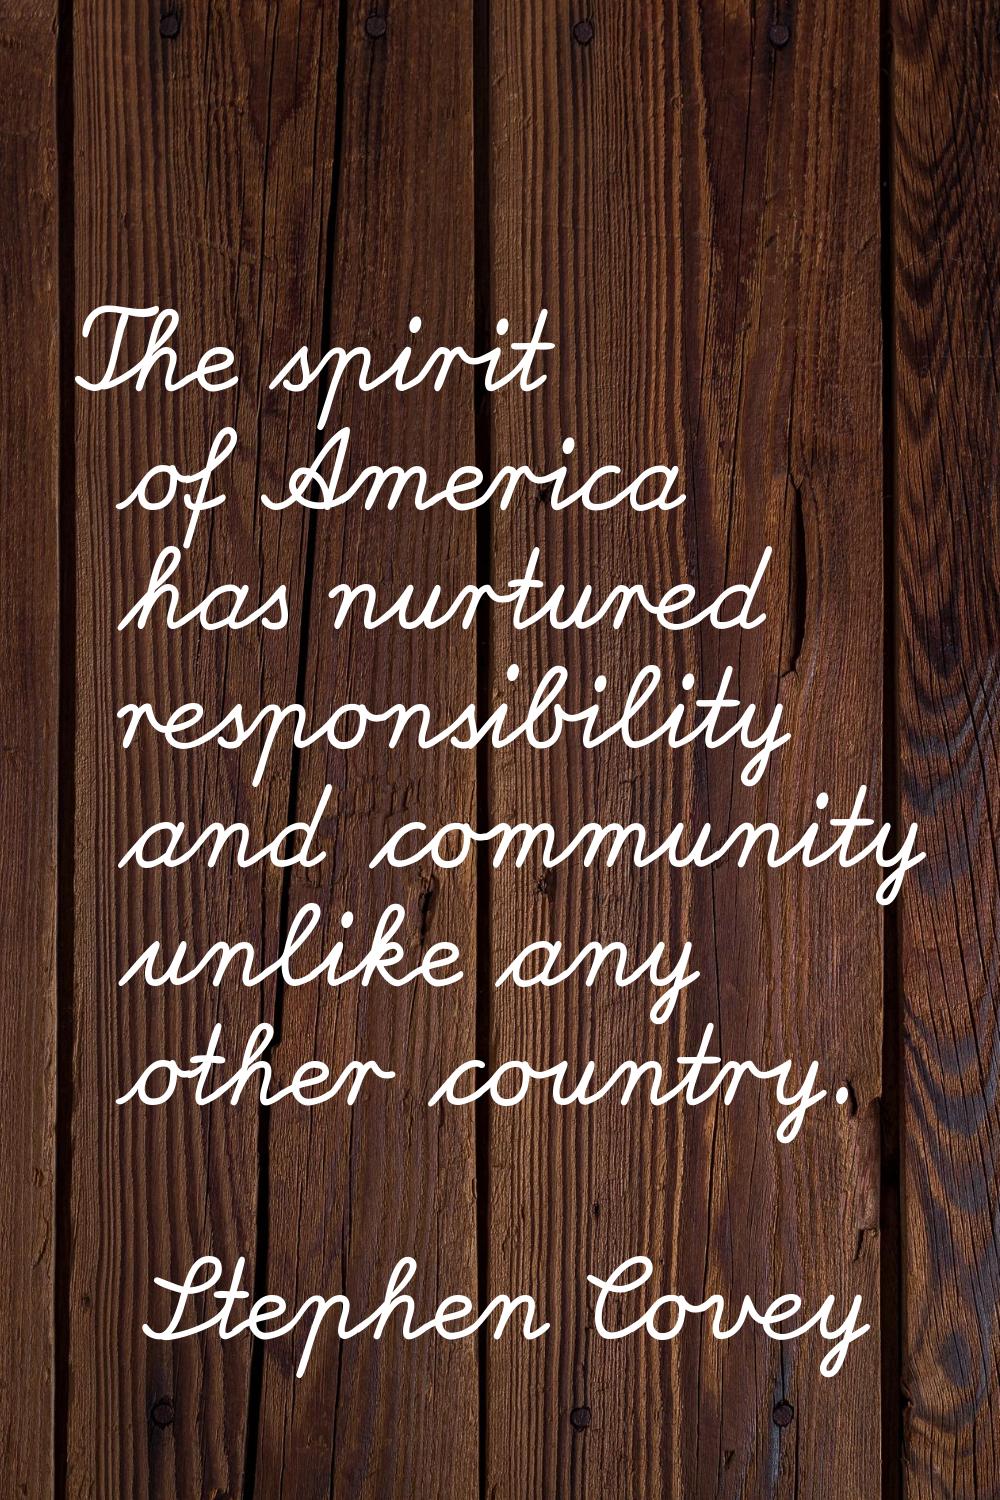 The spirit of America has nurtured responsibility and community unlike any other country.